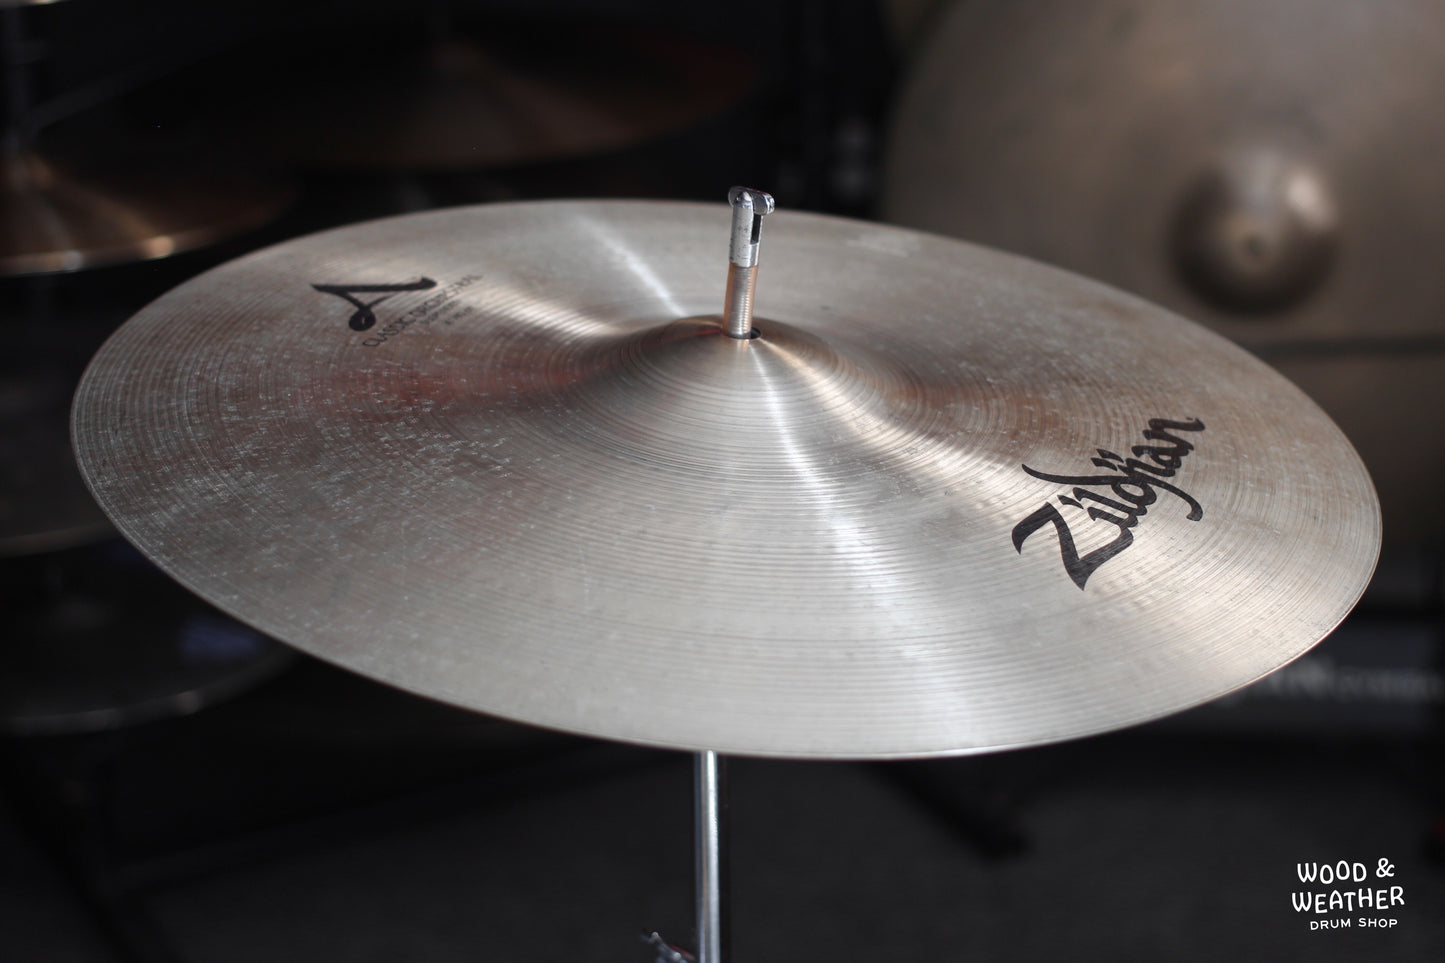 Used Zildjian 16" A Classic Orchestral Suspended Cymbal 1160g